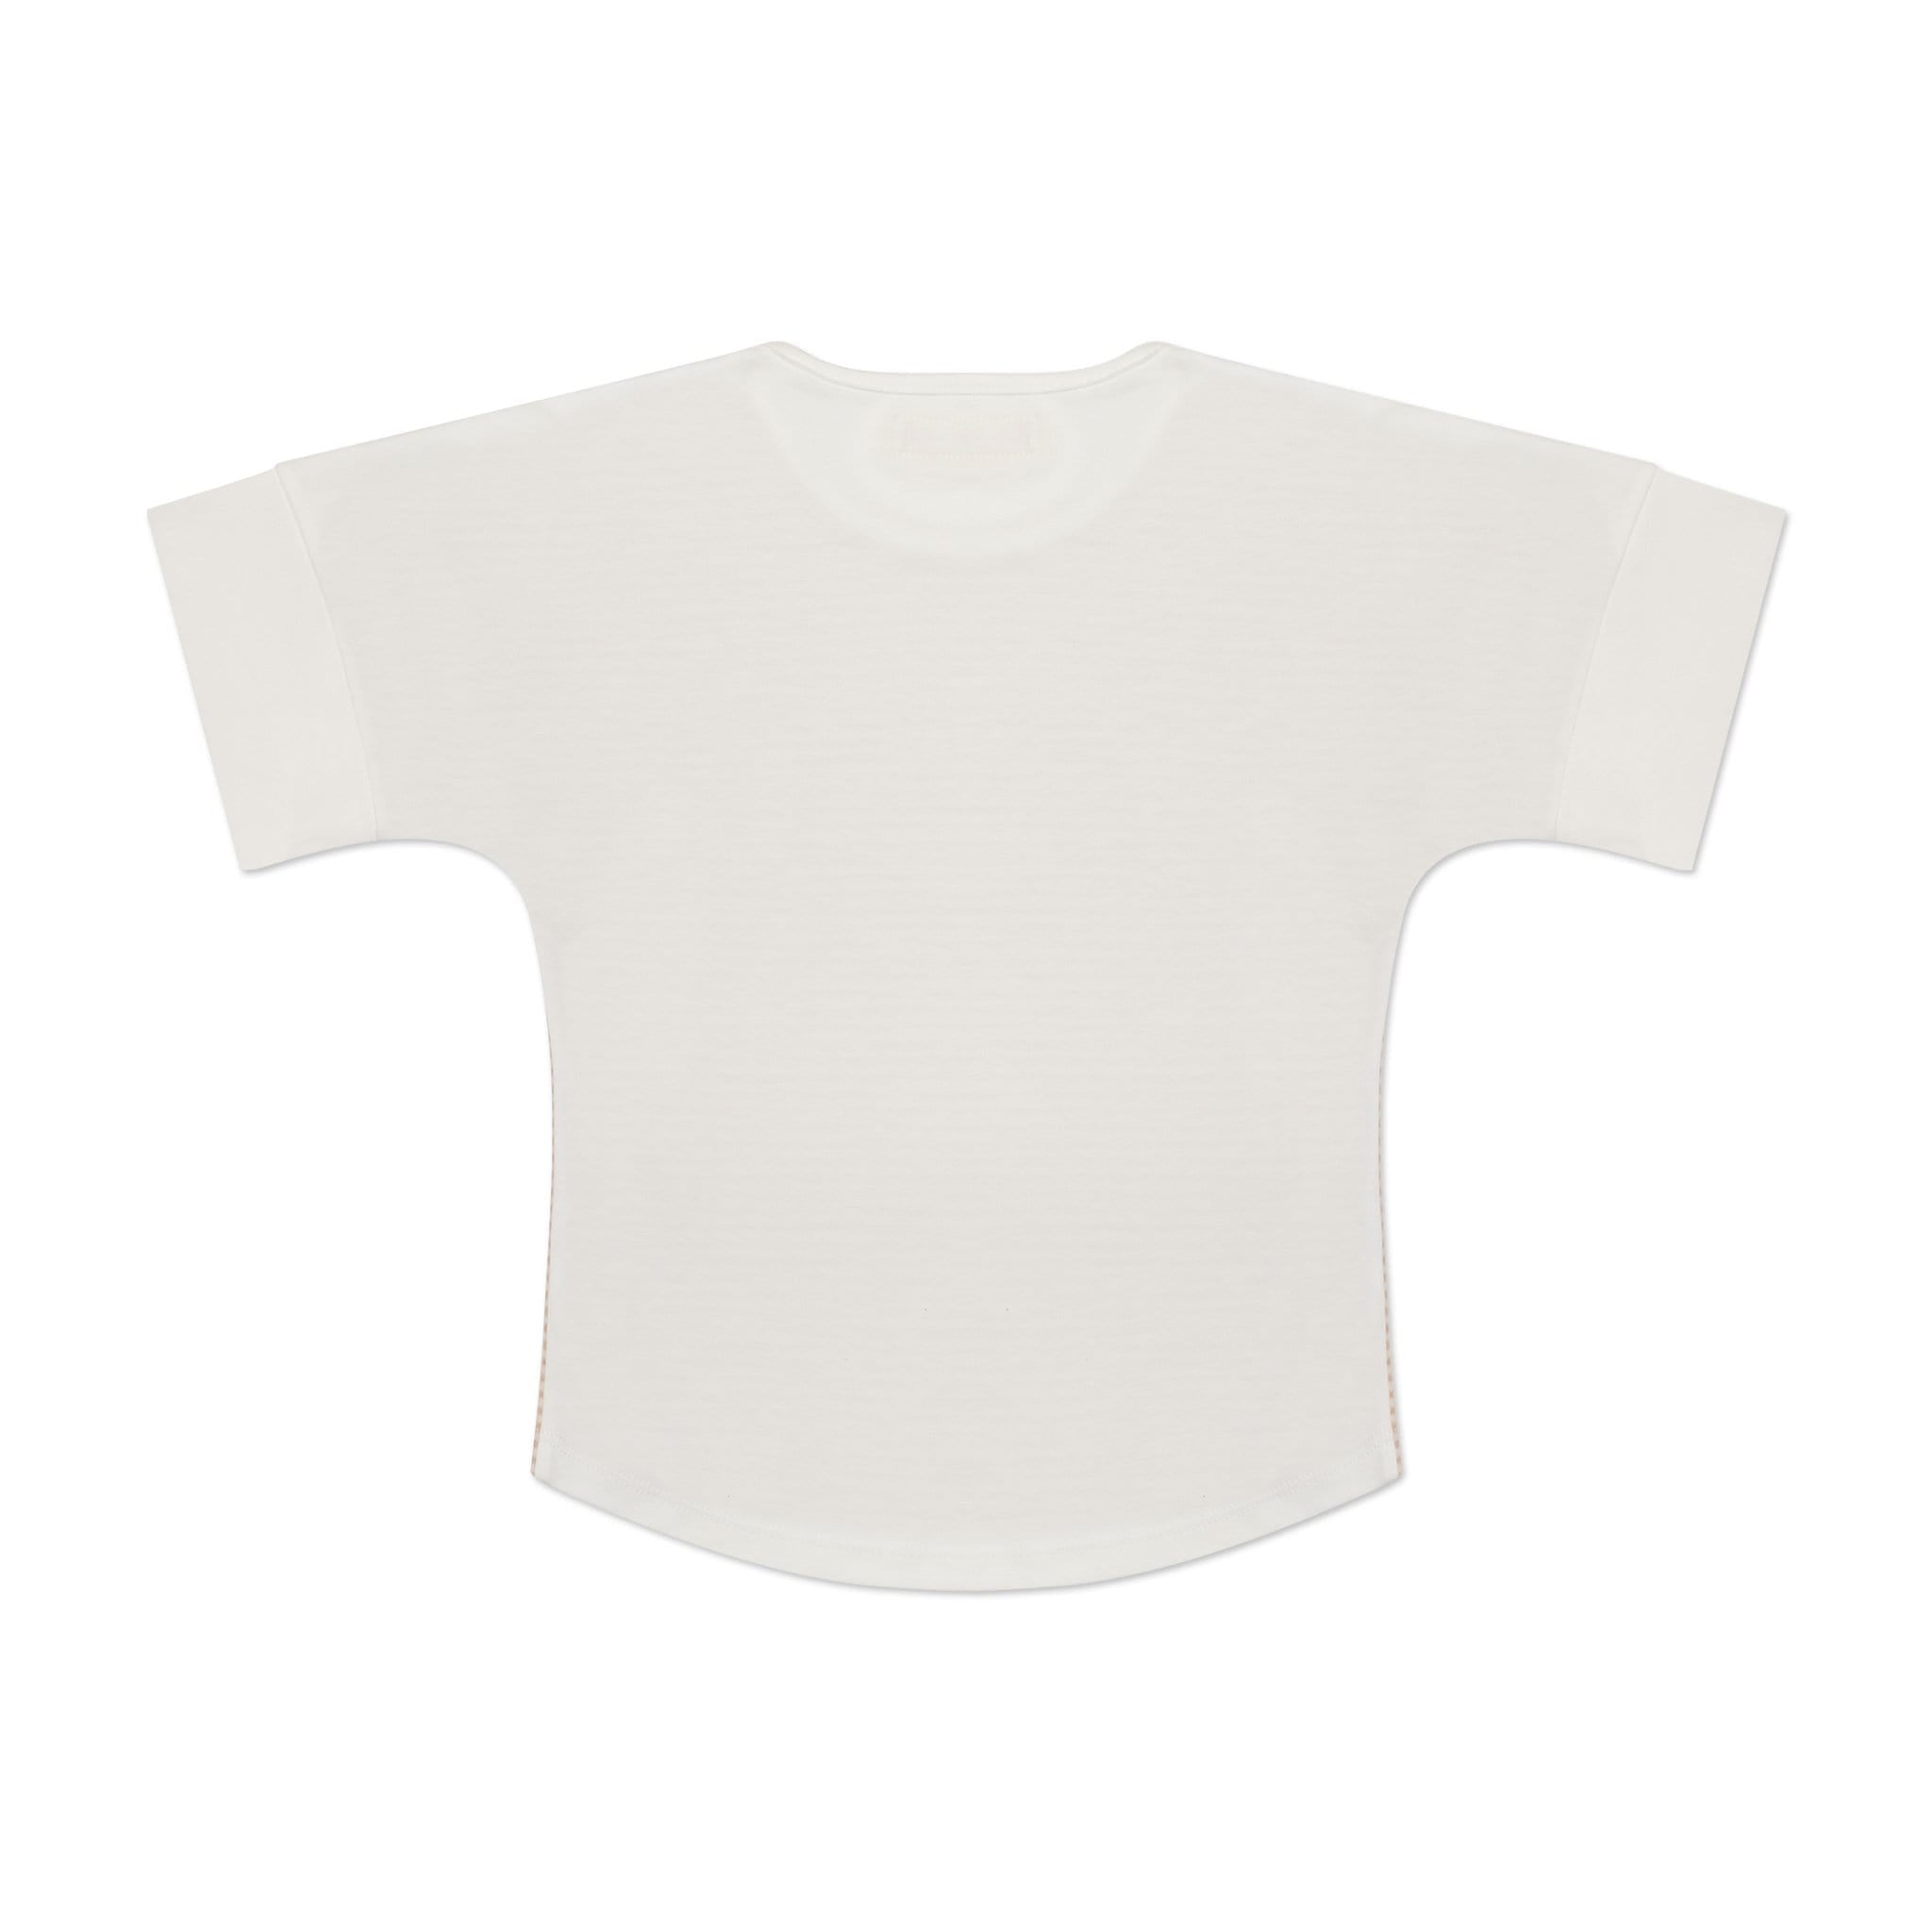 Girls organic cotton tee that is durable, sustainable, and eco-friendly. Natural beige stripes. 